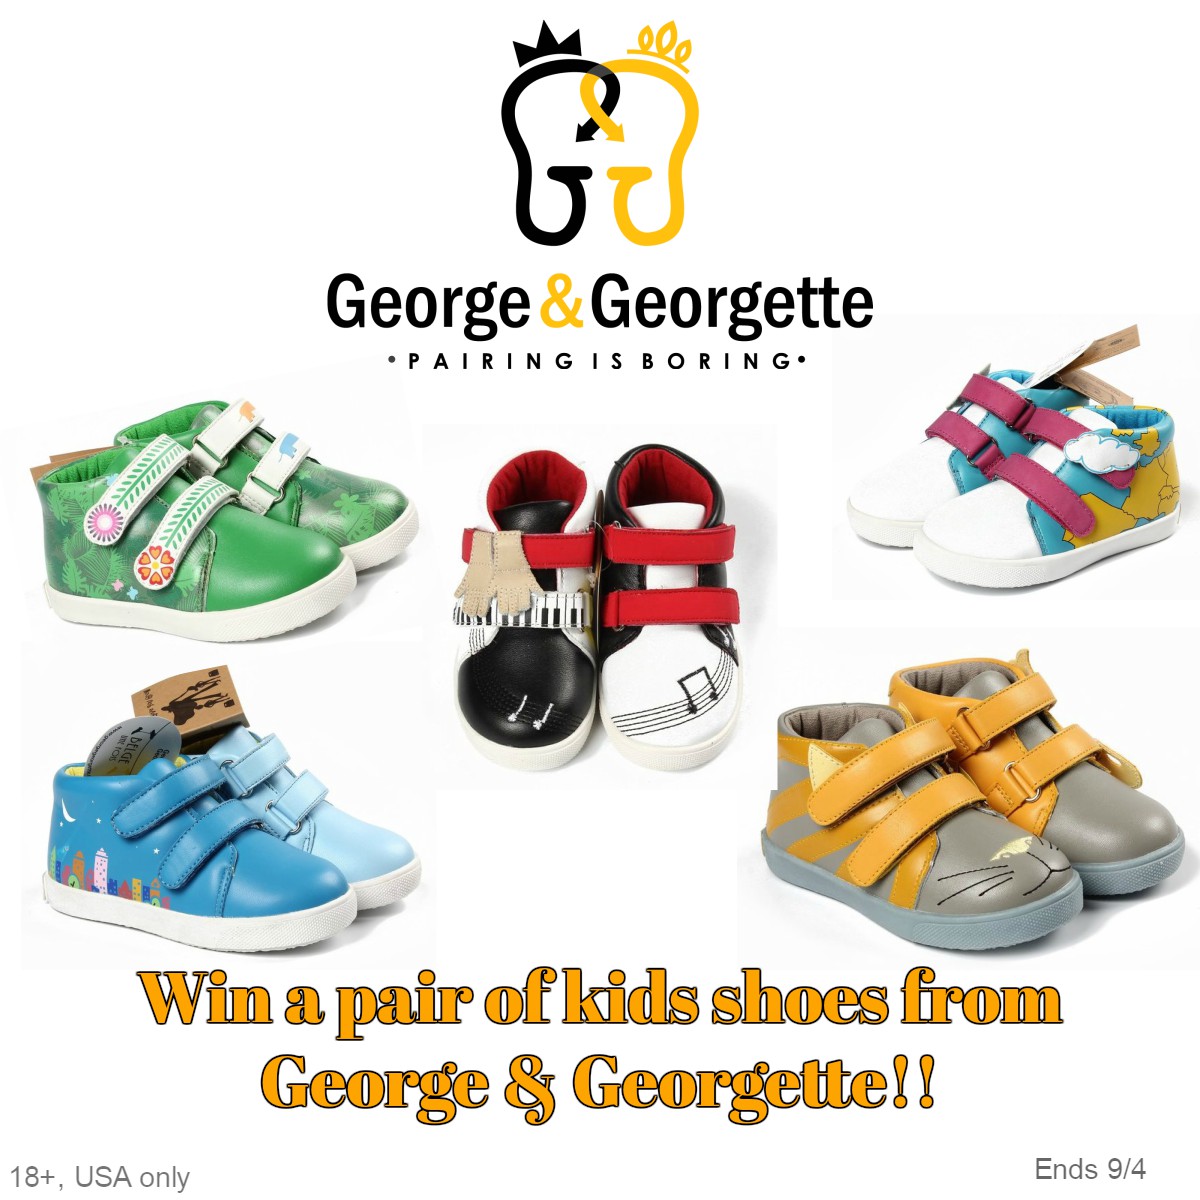 George & Georgette kids shoes Giveaway - Winners Choice!! (ends 9/4)